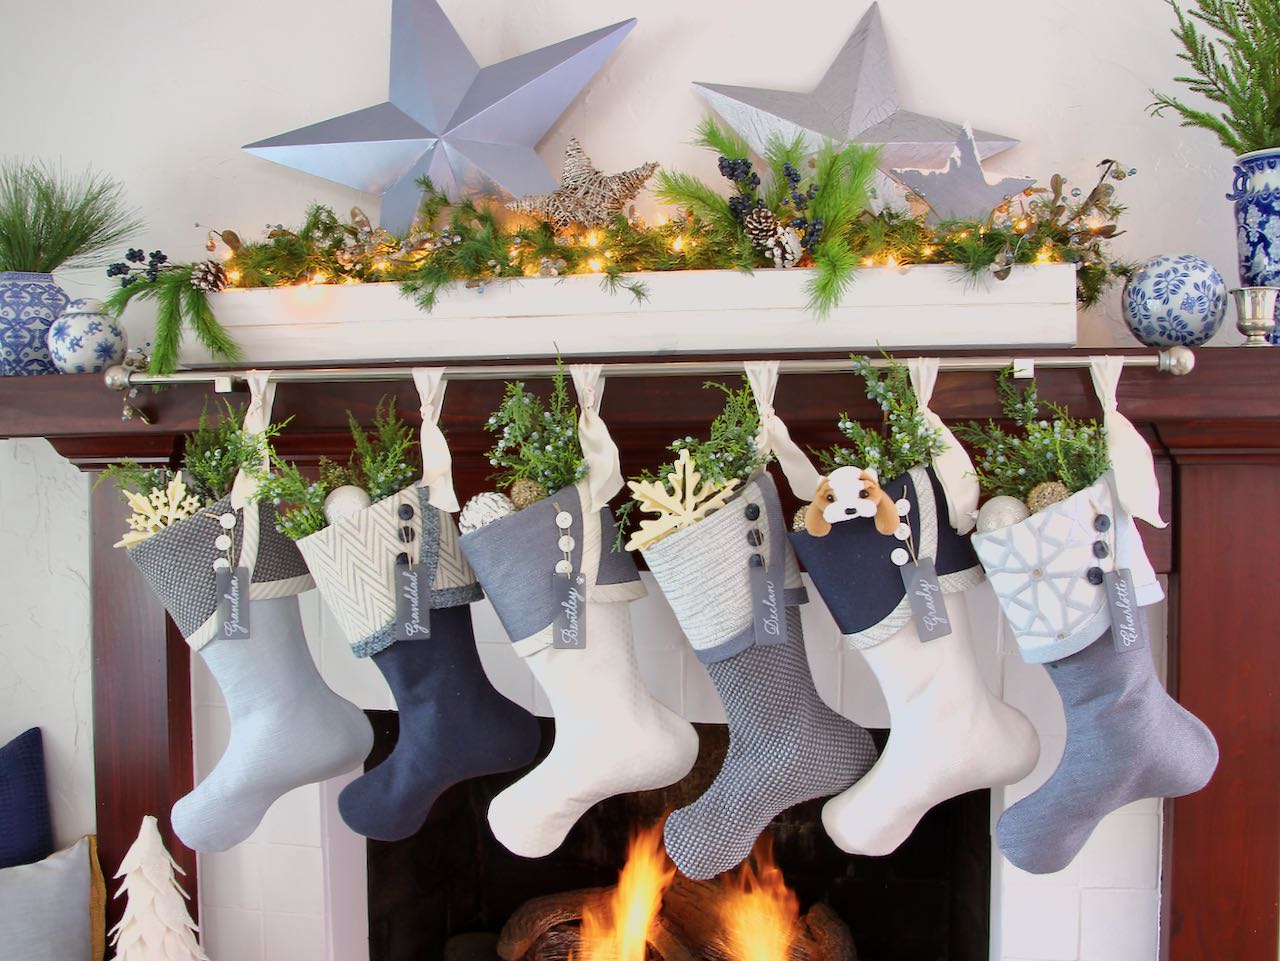 Mantel Display featuring 6 Christmas stockings with Sea glass name tags